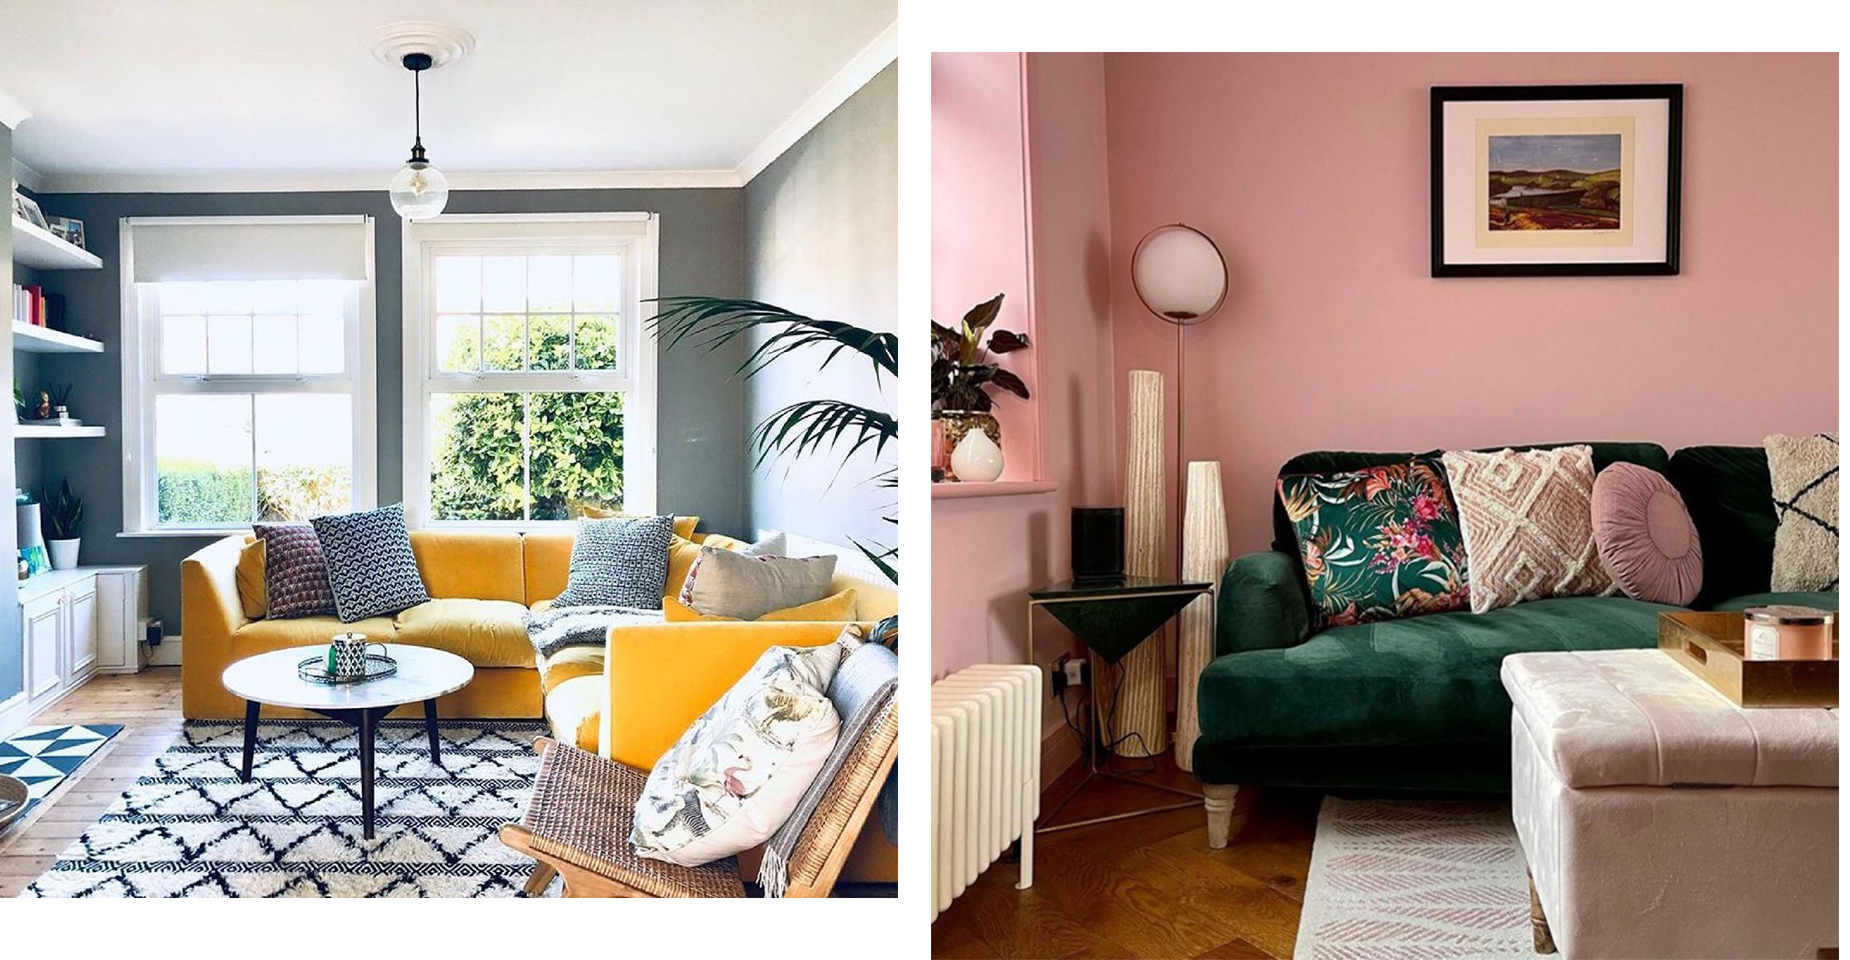 Colour scheme ideas for your home | Swoon